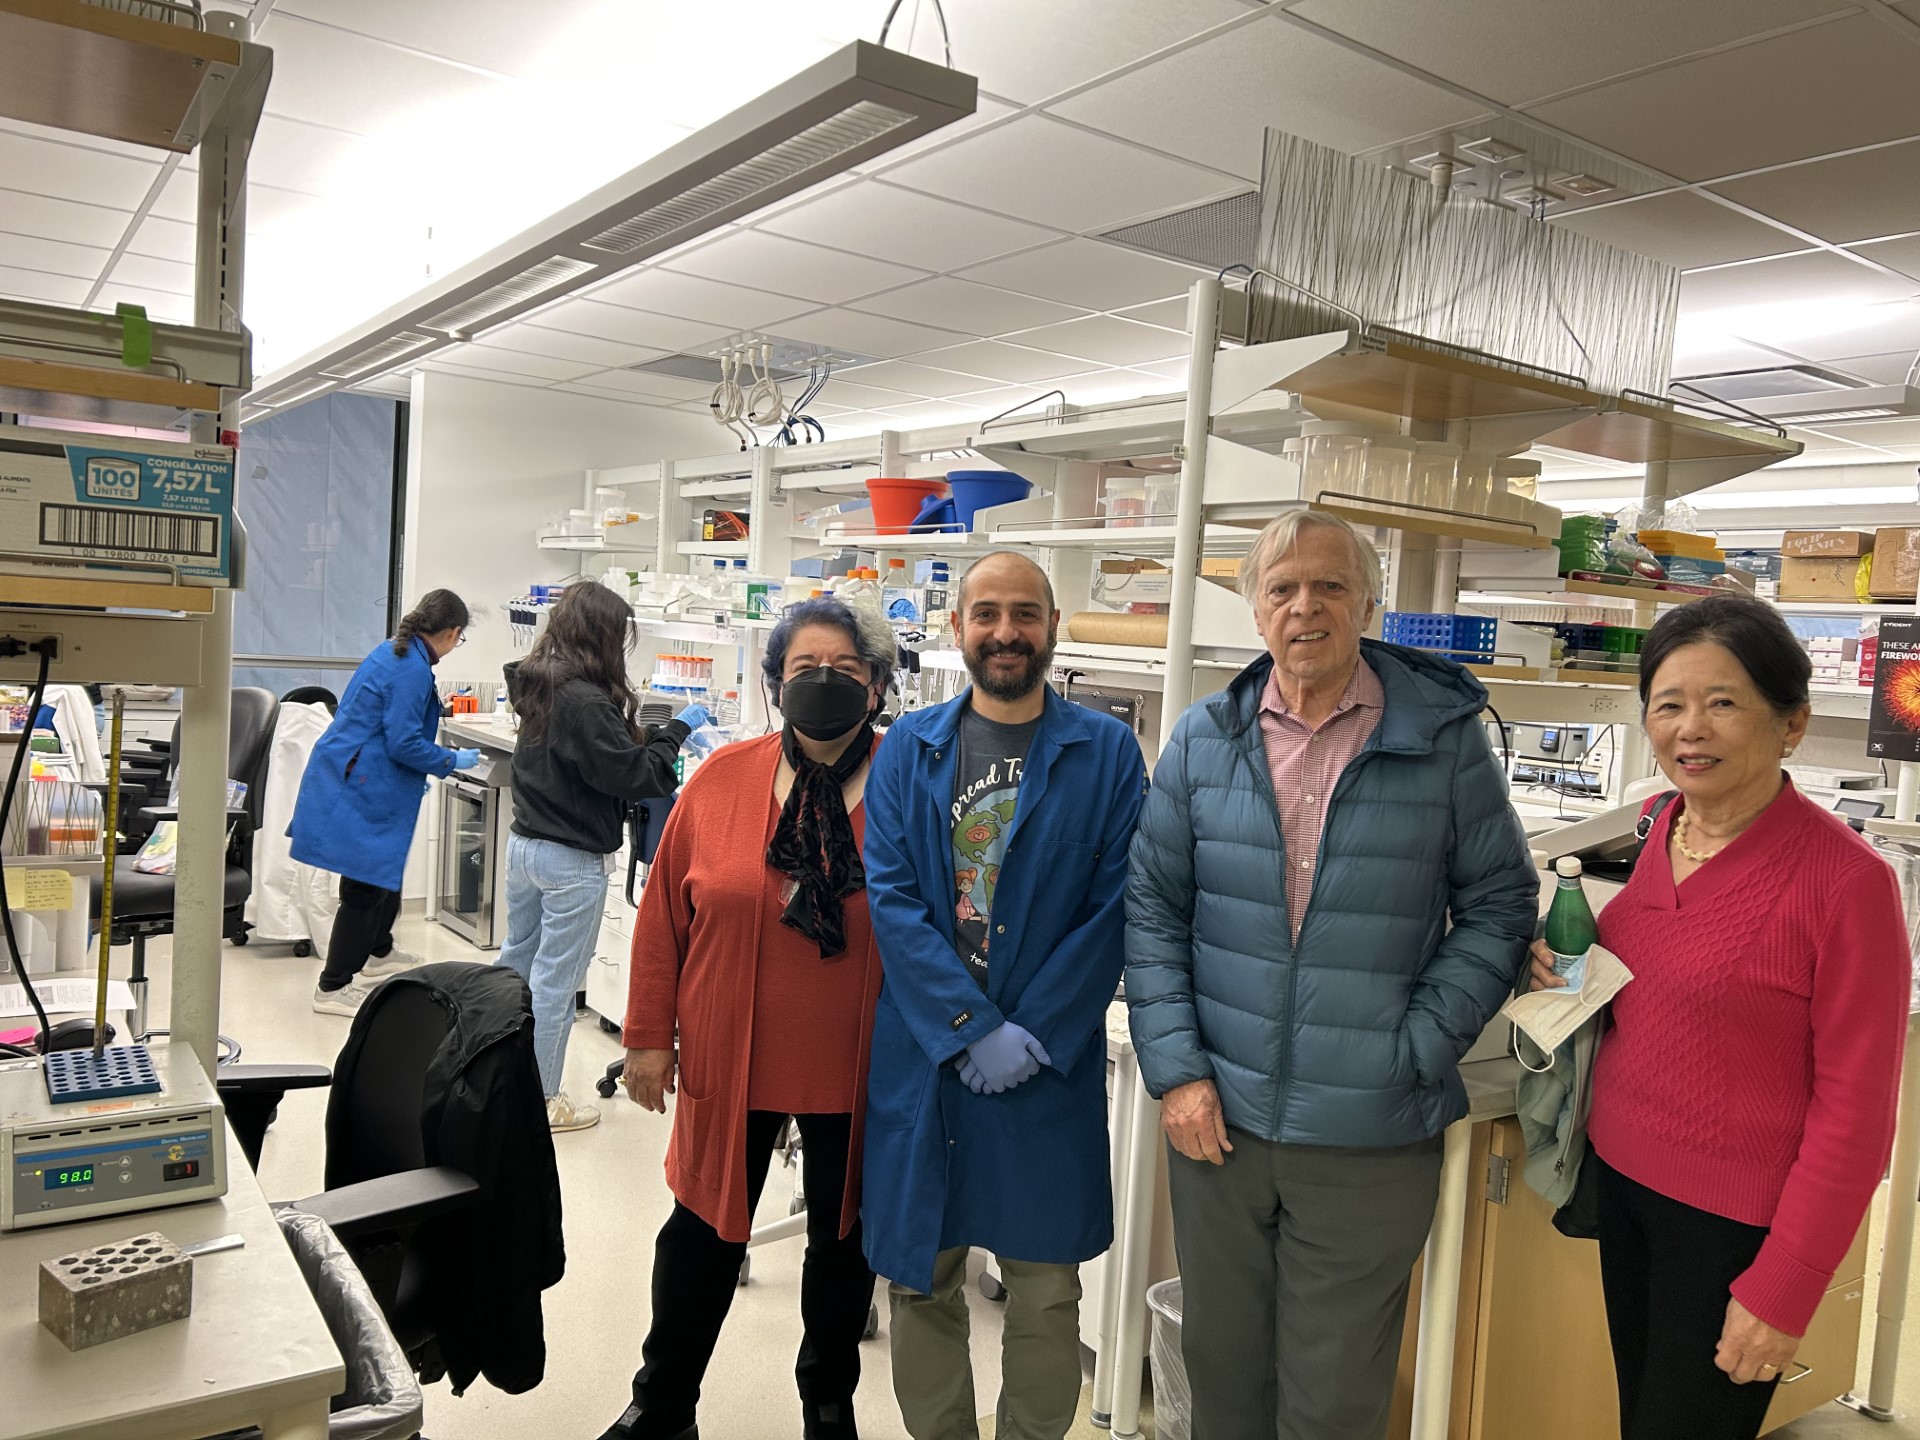 Touring the lab with Licia and Maurizio.